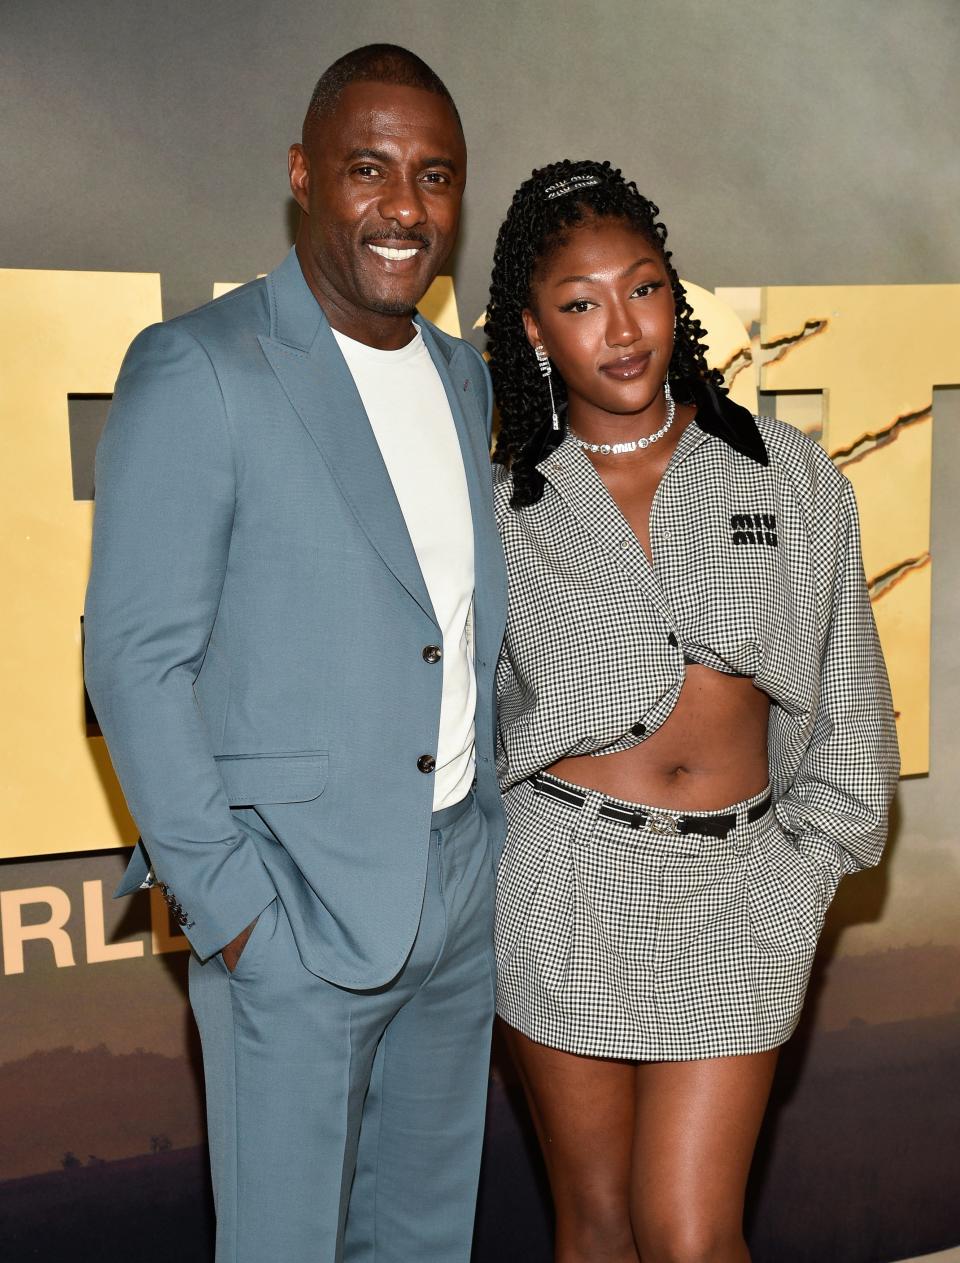 Idris Elba, left, and daughter Isan Elba at the world premiere of "Beast" in New York earlier this month.